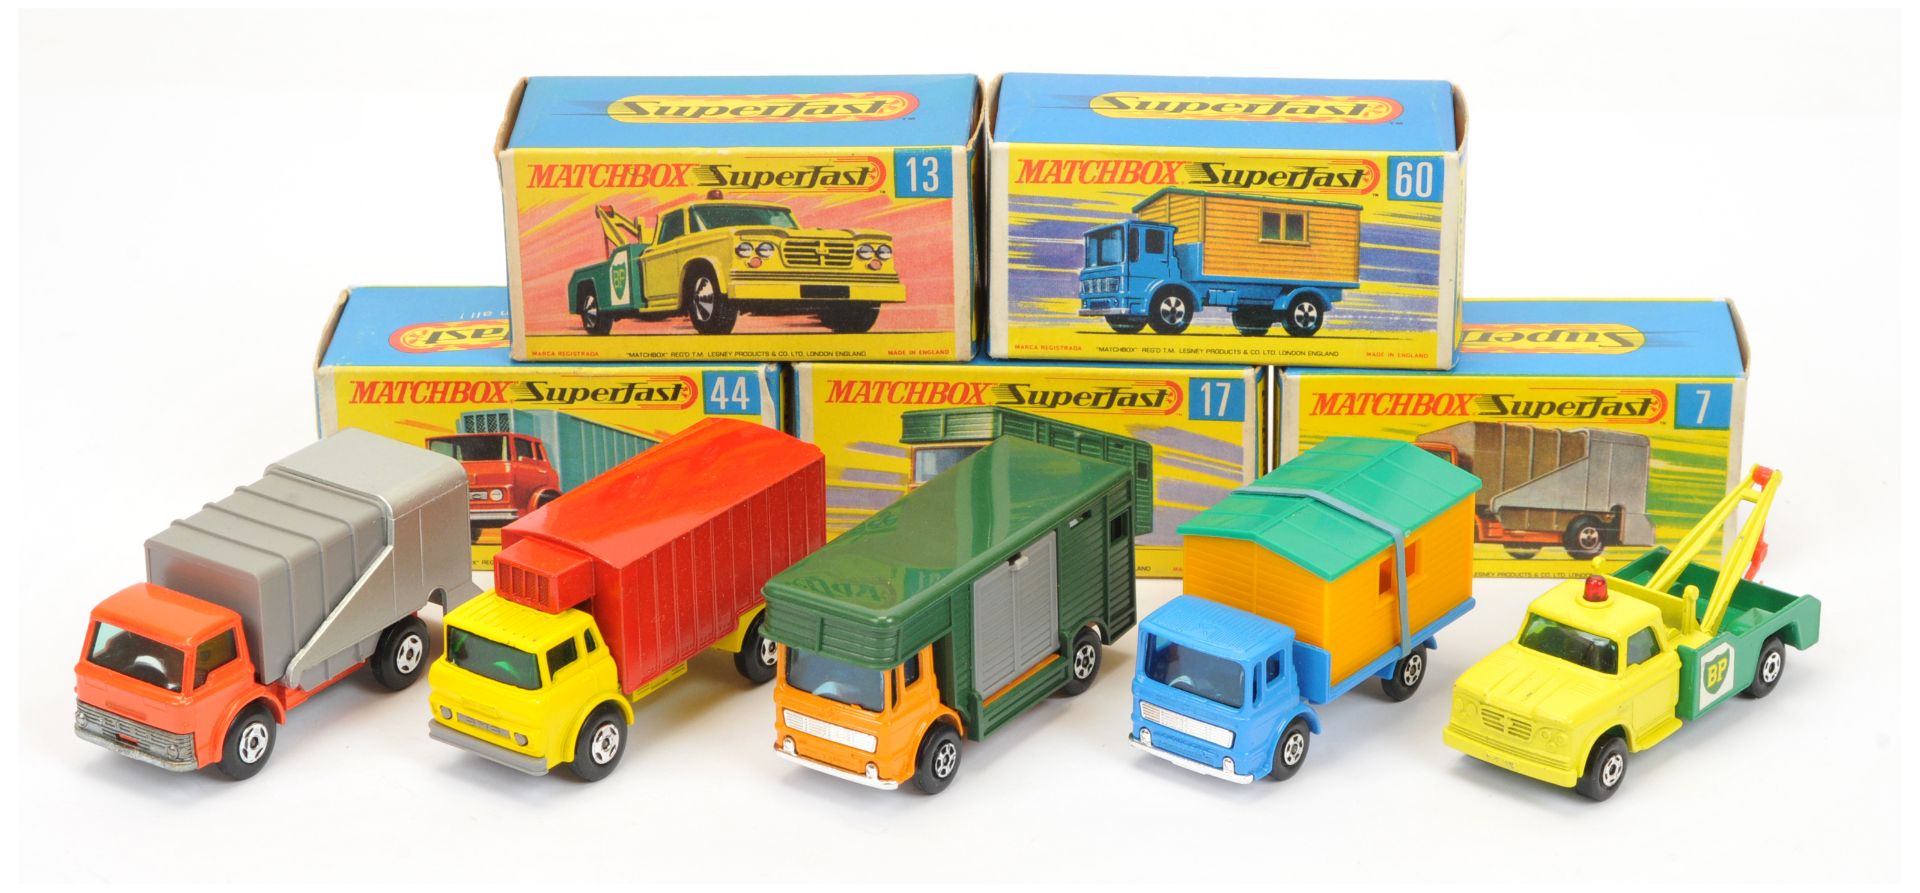 Matchbox Superfast Group Of  5 - (1) 7a Refuse truck - Orange, grey and silver (2) 13a Dodge Wrea...